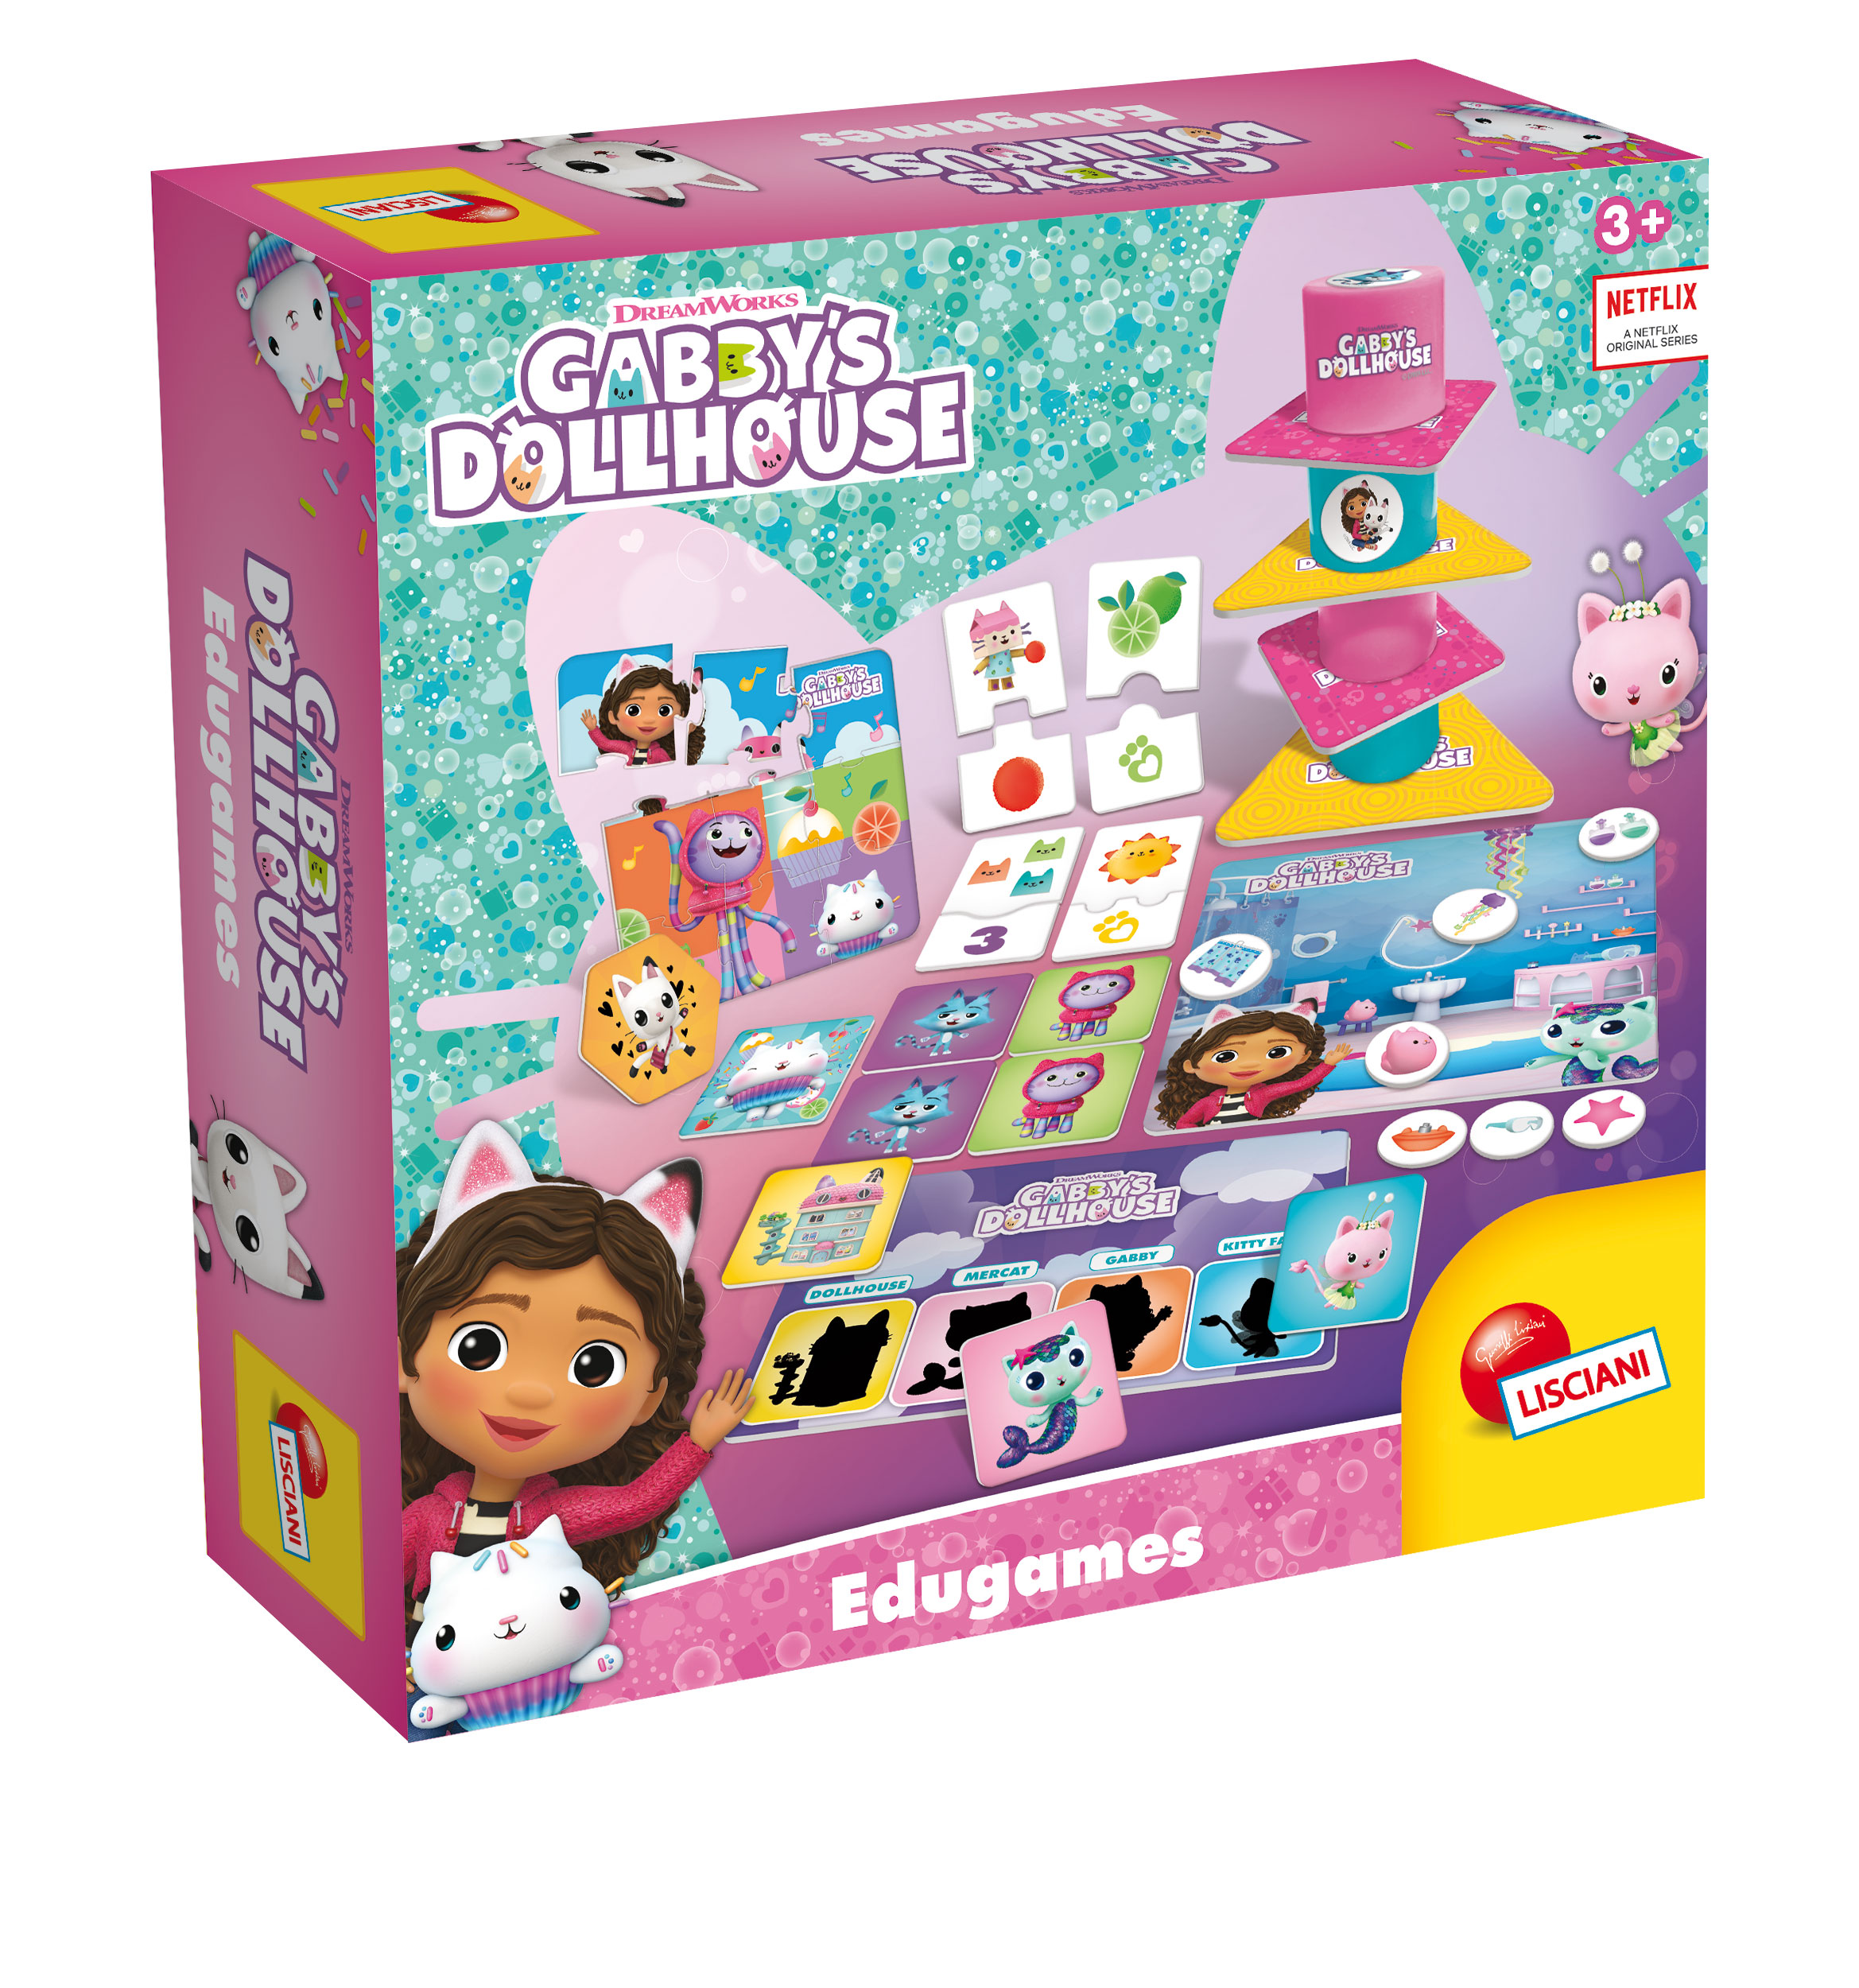 Photo 1 of the game GABBY'S DOLLHOUSE EDUGAMES